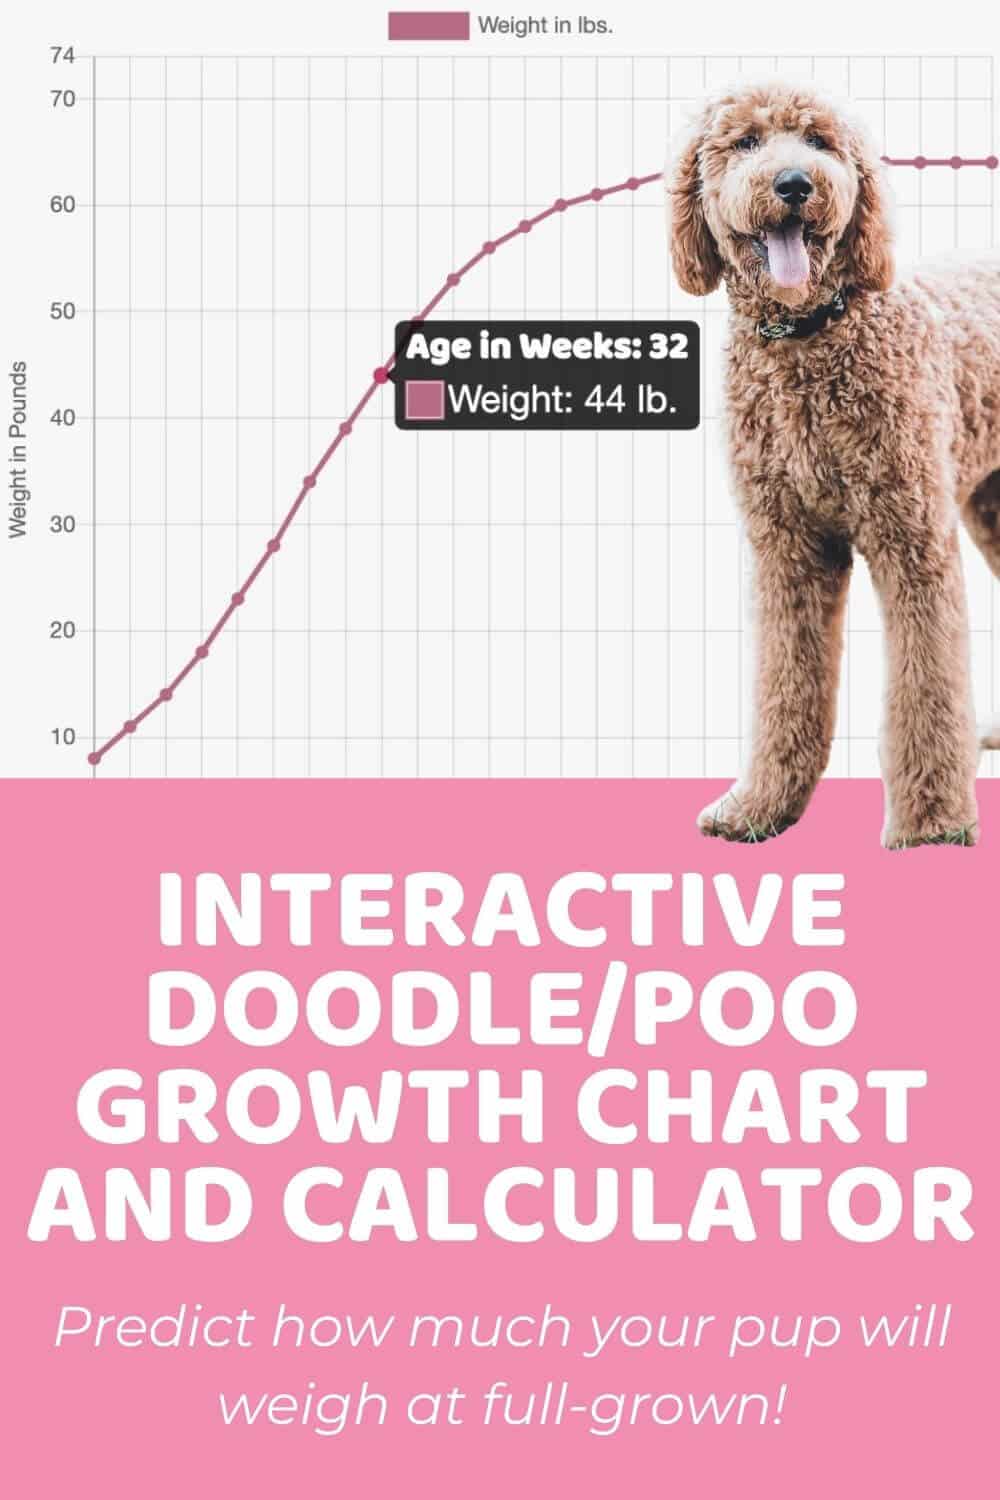 https://doodledoods.com/wp-content/uploads/2020/08/Interactive-Doodle-and-Poo-and-Poodle-Mix-Growth-Chart-and-Calculator.jpg